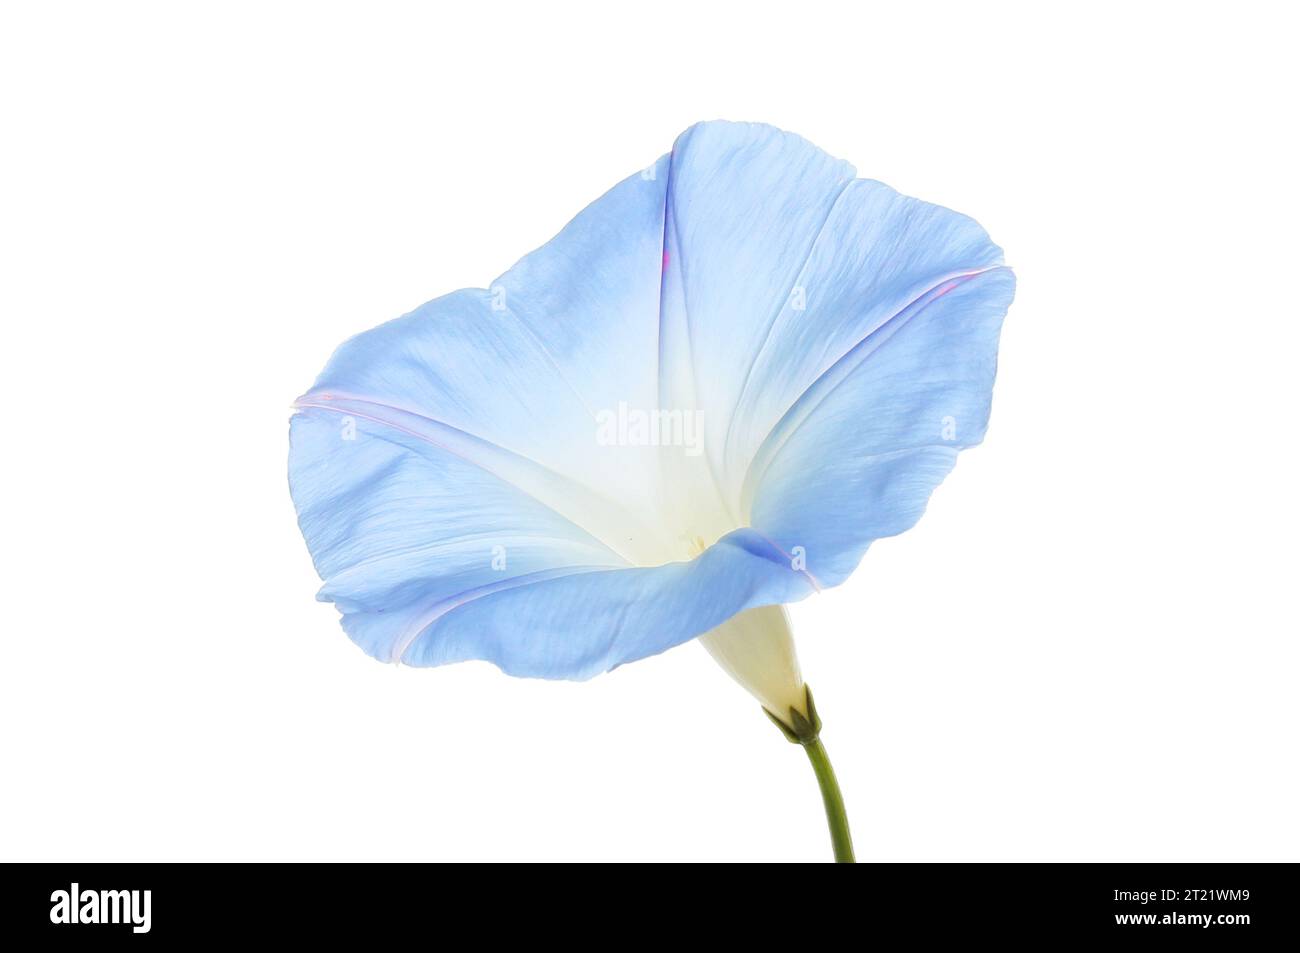 Morning glory, Ipomoea tricolor, flower isolated against white Stock Photo